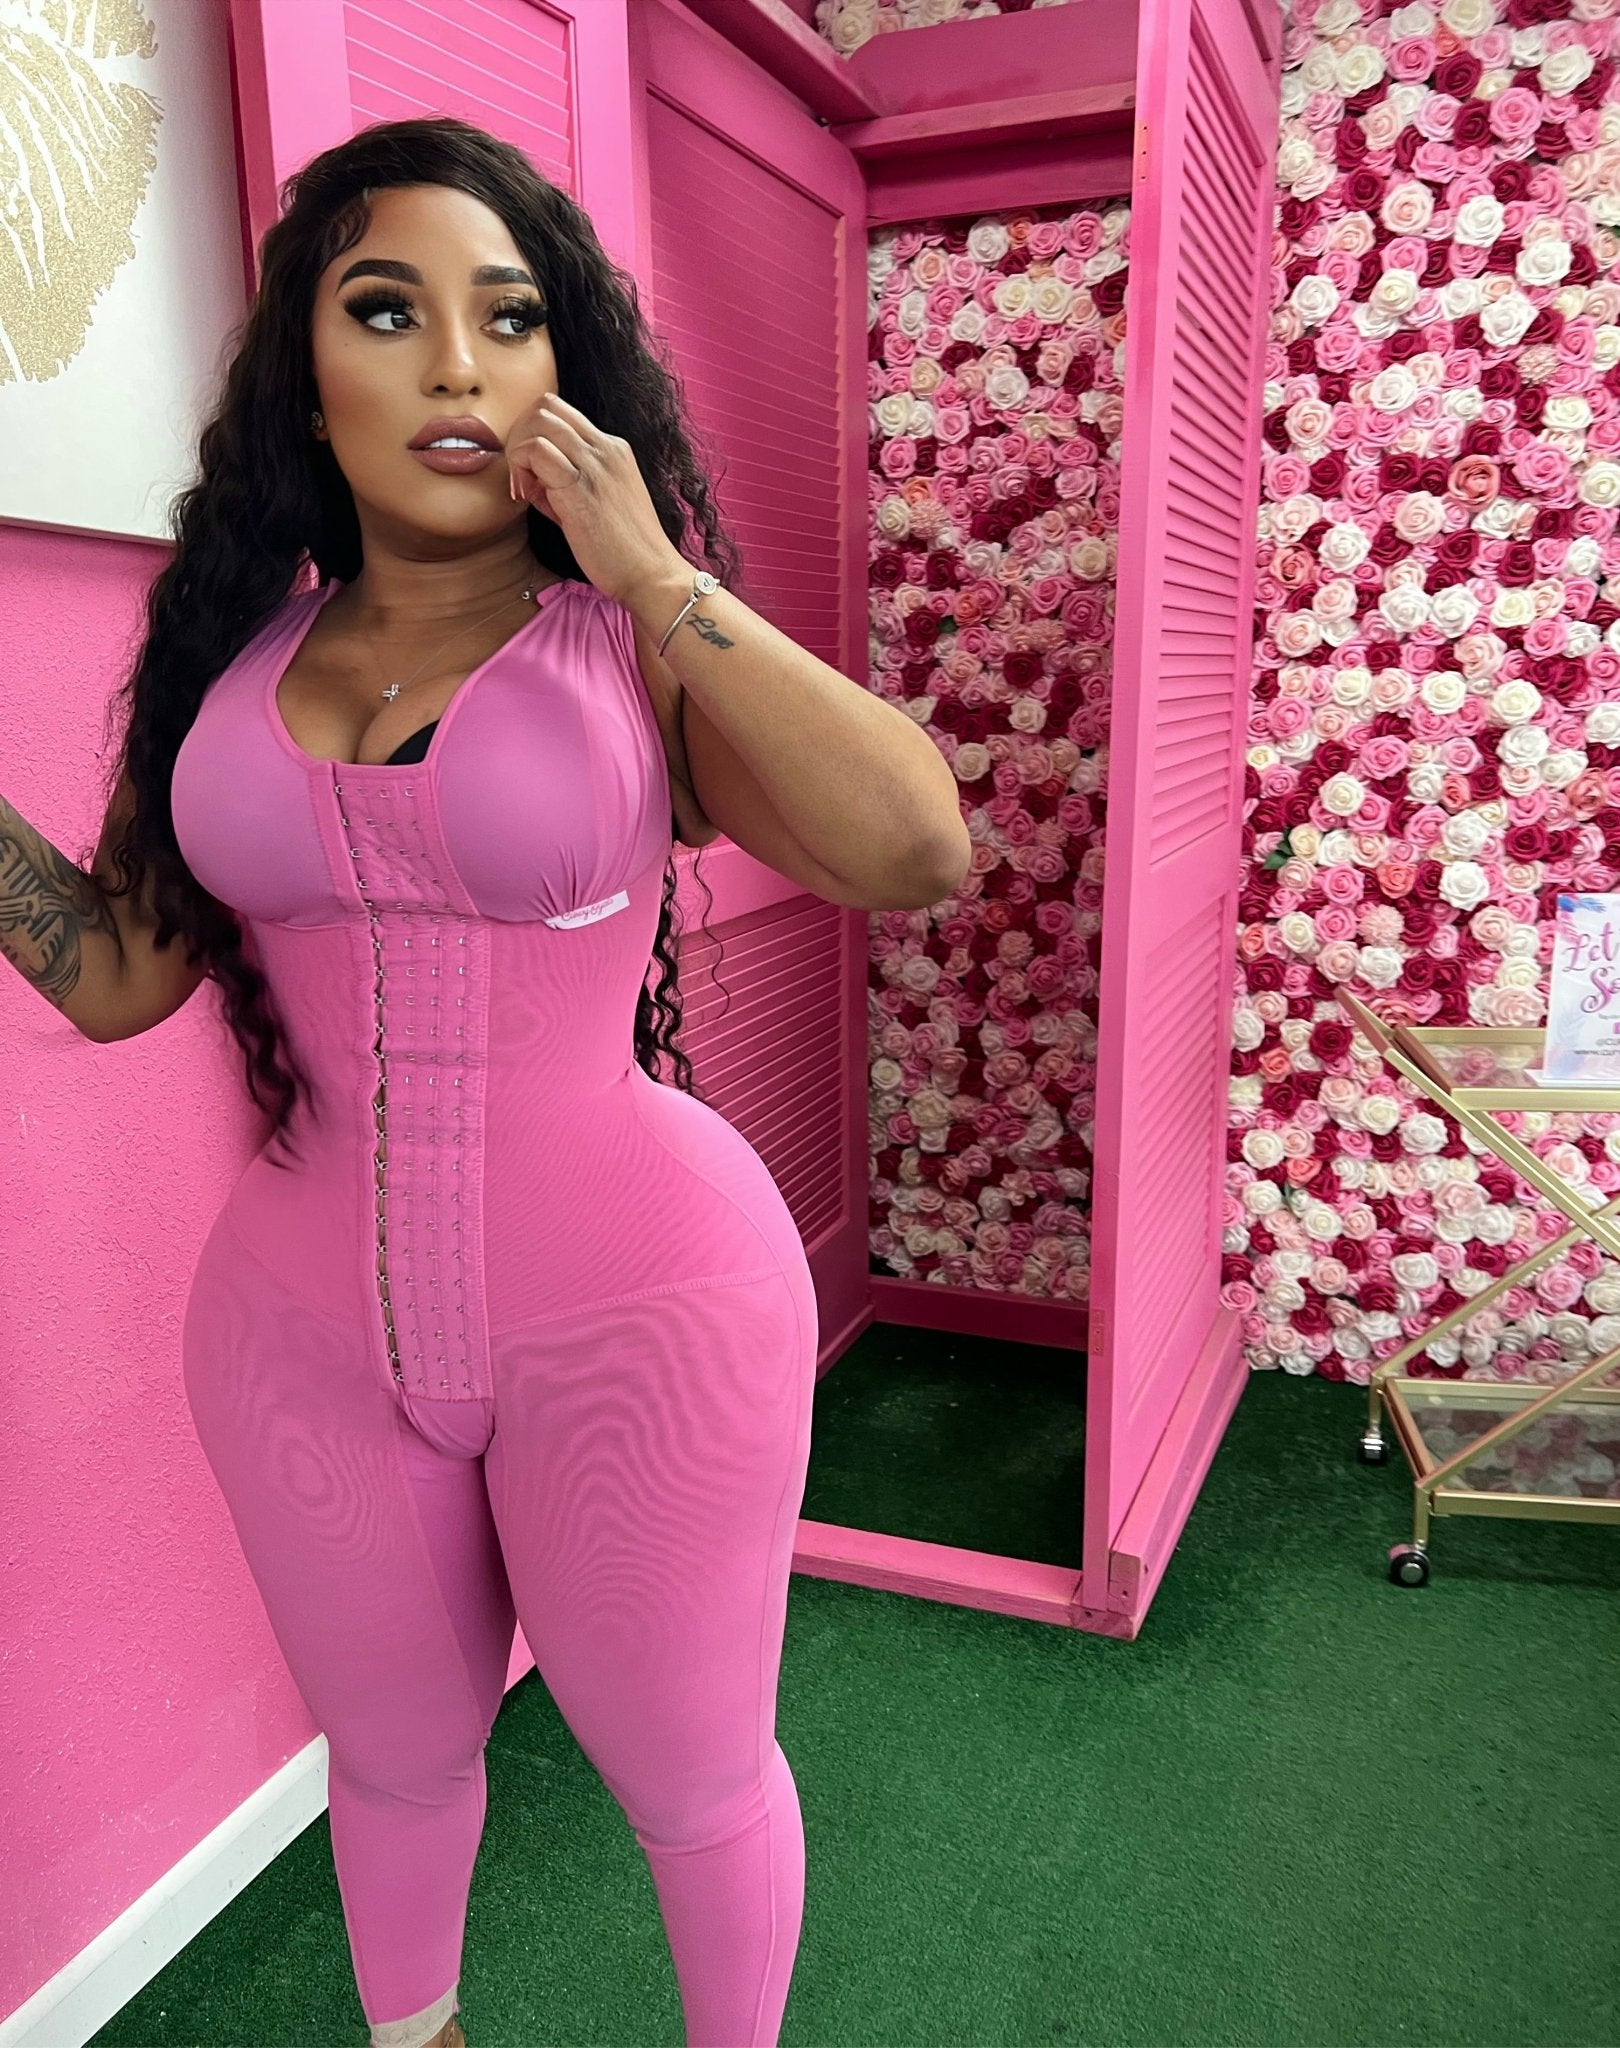 Get Your Perfect Hourglass Figure with the Aliyah Faja